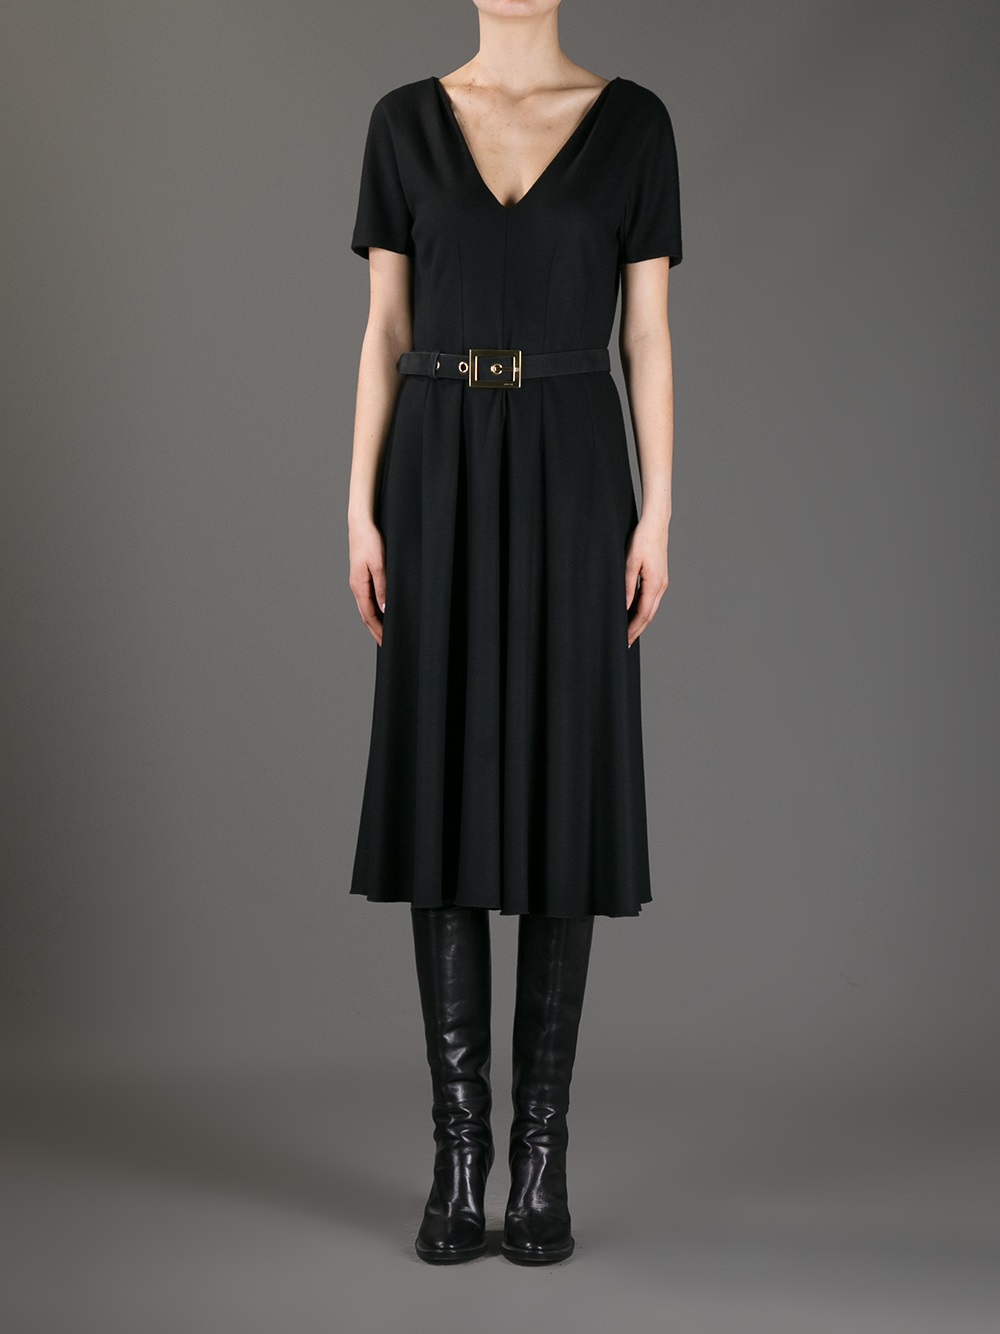 Lyst - Gucci Belted Jersey Dress in Black